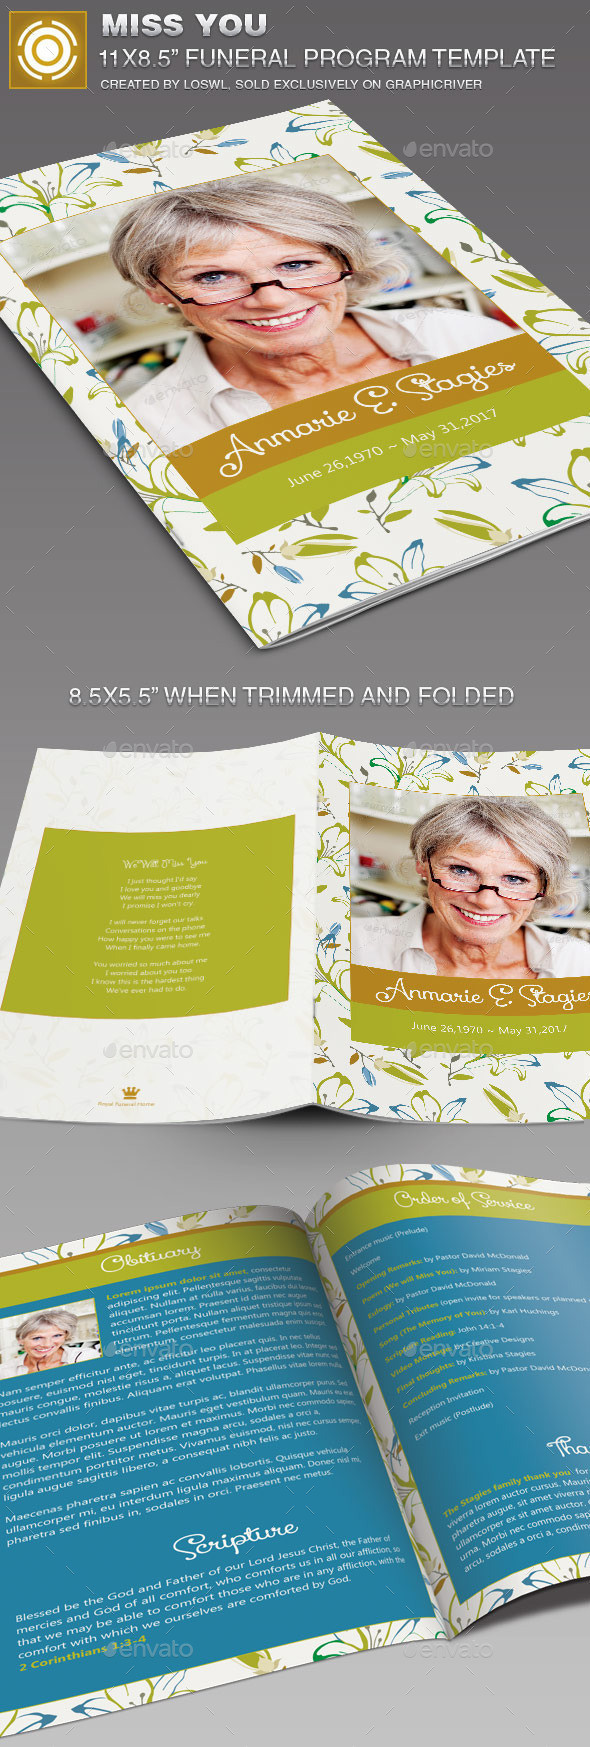 Miss you funeral program template image preview